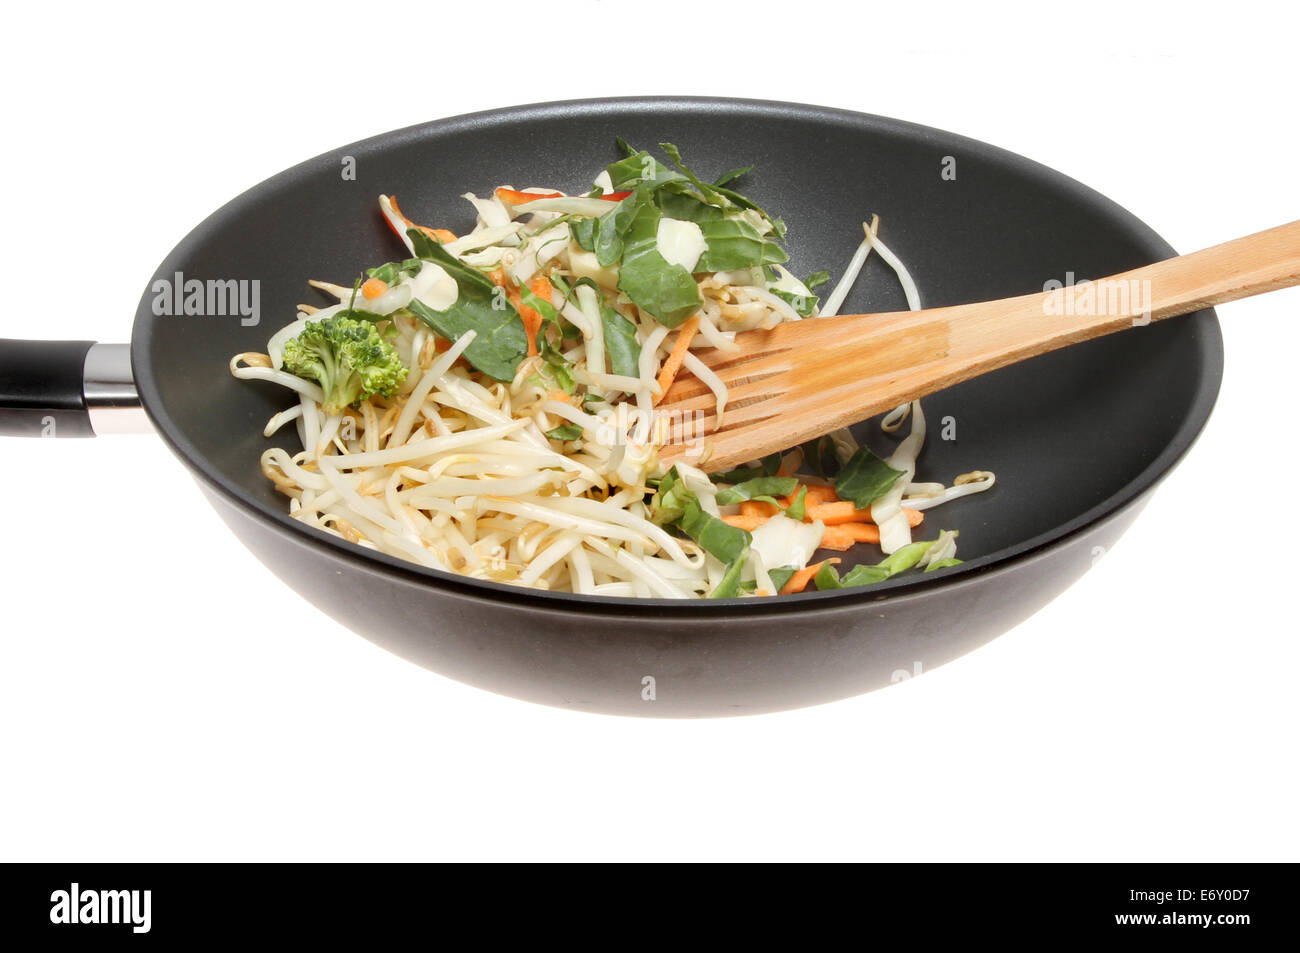 https://c8.alamy.com/comp/E6Y0D7/closeup-of-a-wok-with-stir-fry-vegetables-bean-sprouts-and-a-wooden-E6Y0D7.jpg